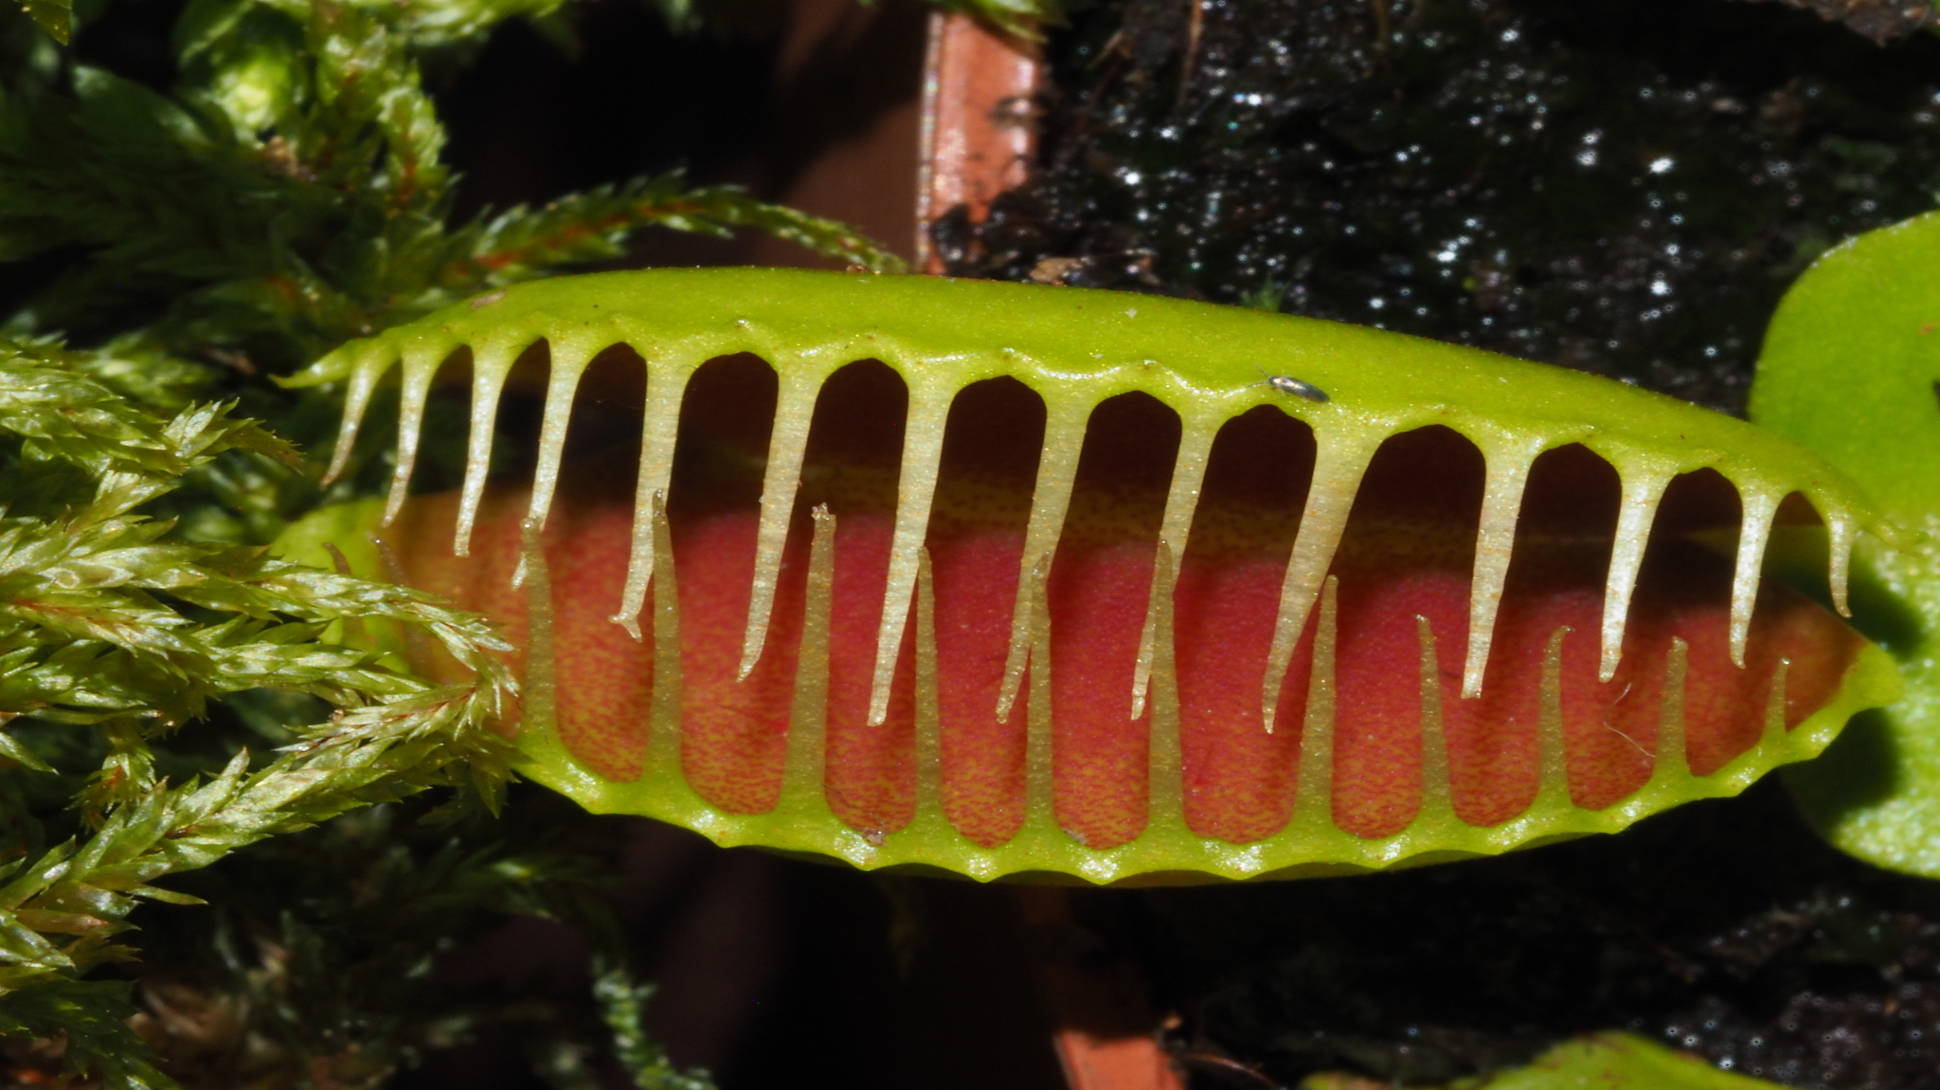 A close up shot of a venus flytrap, with green outside and red inside